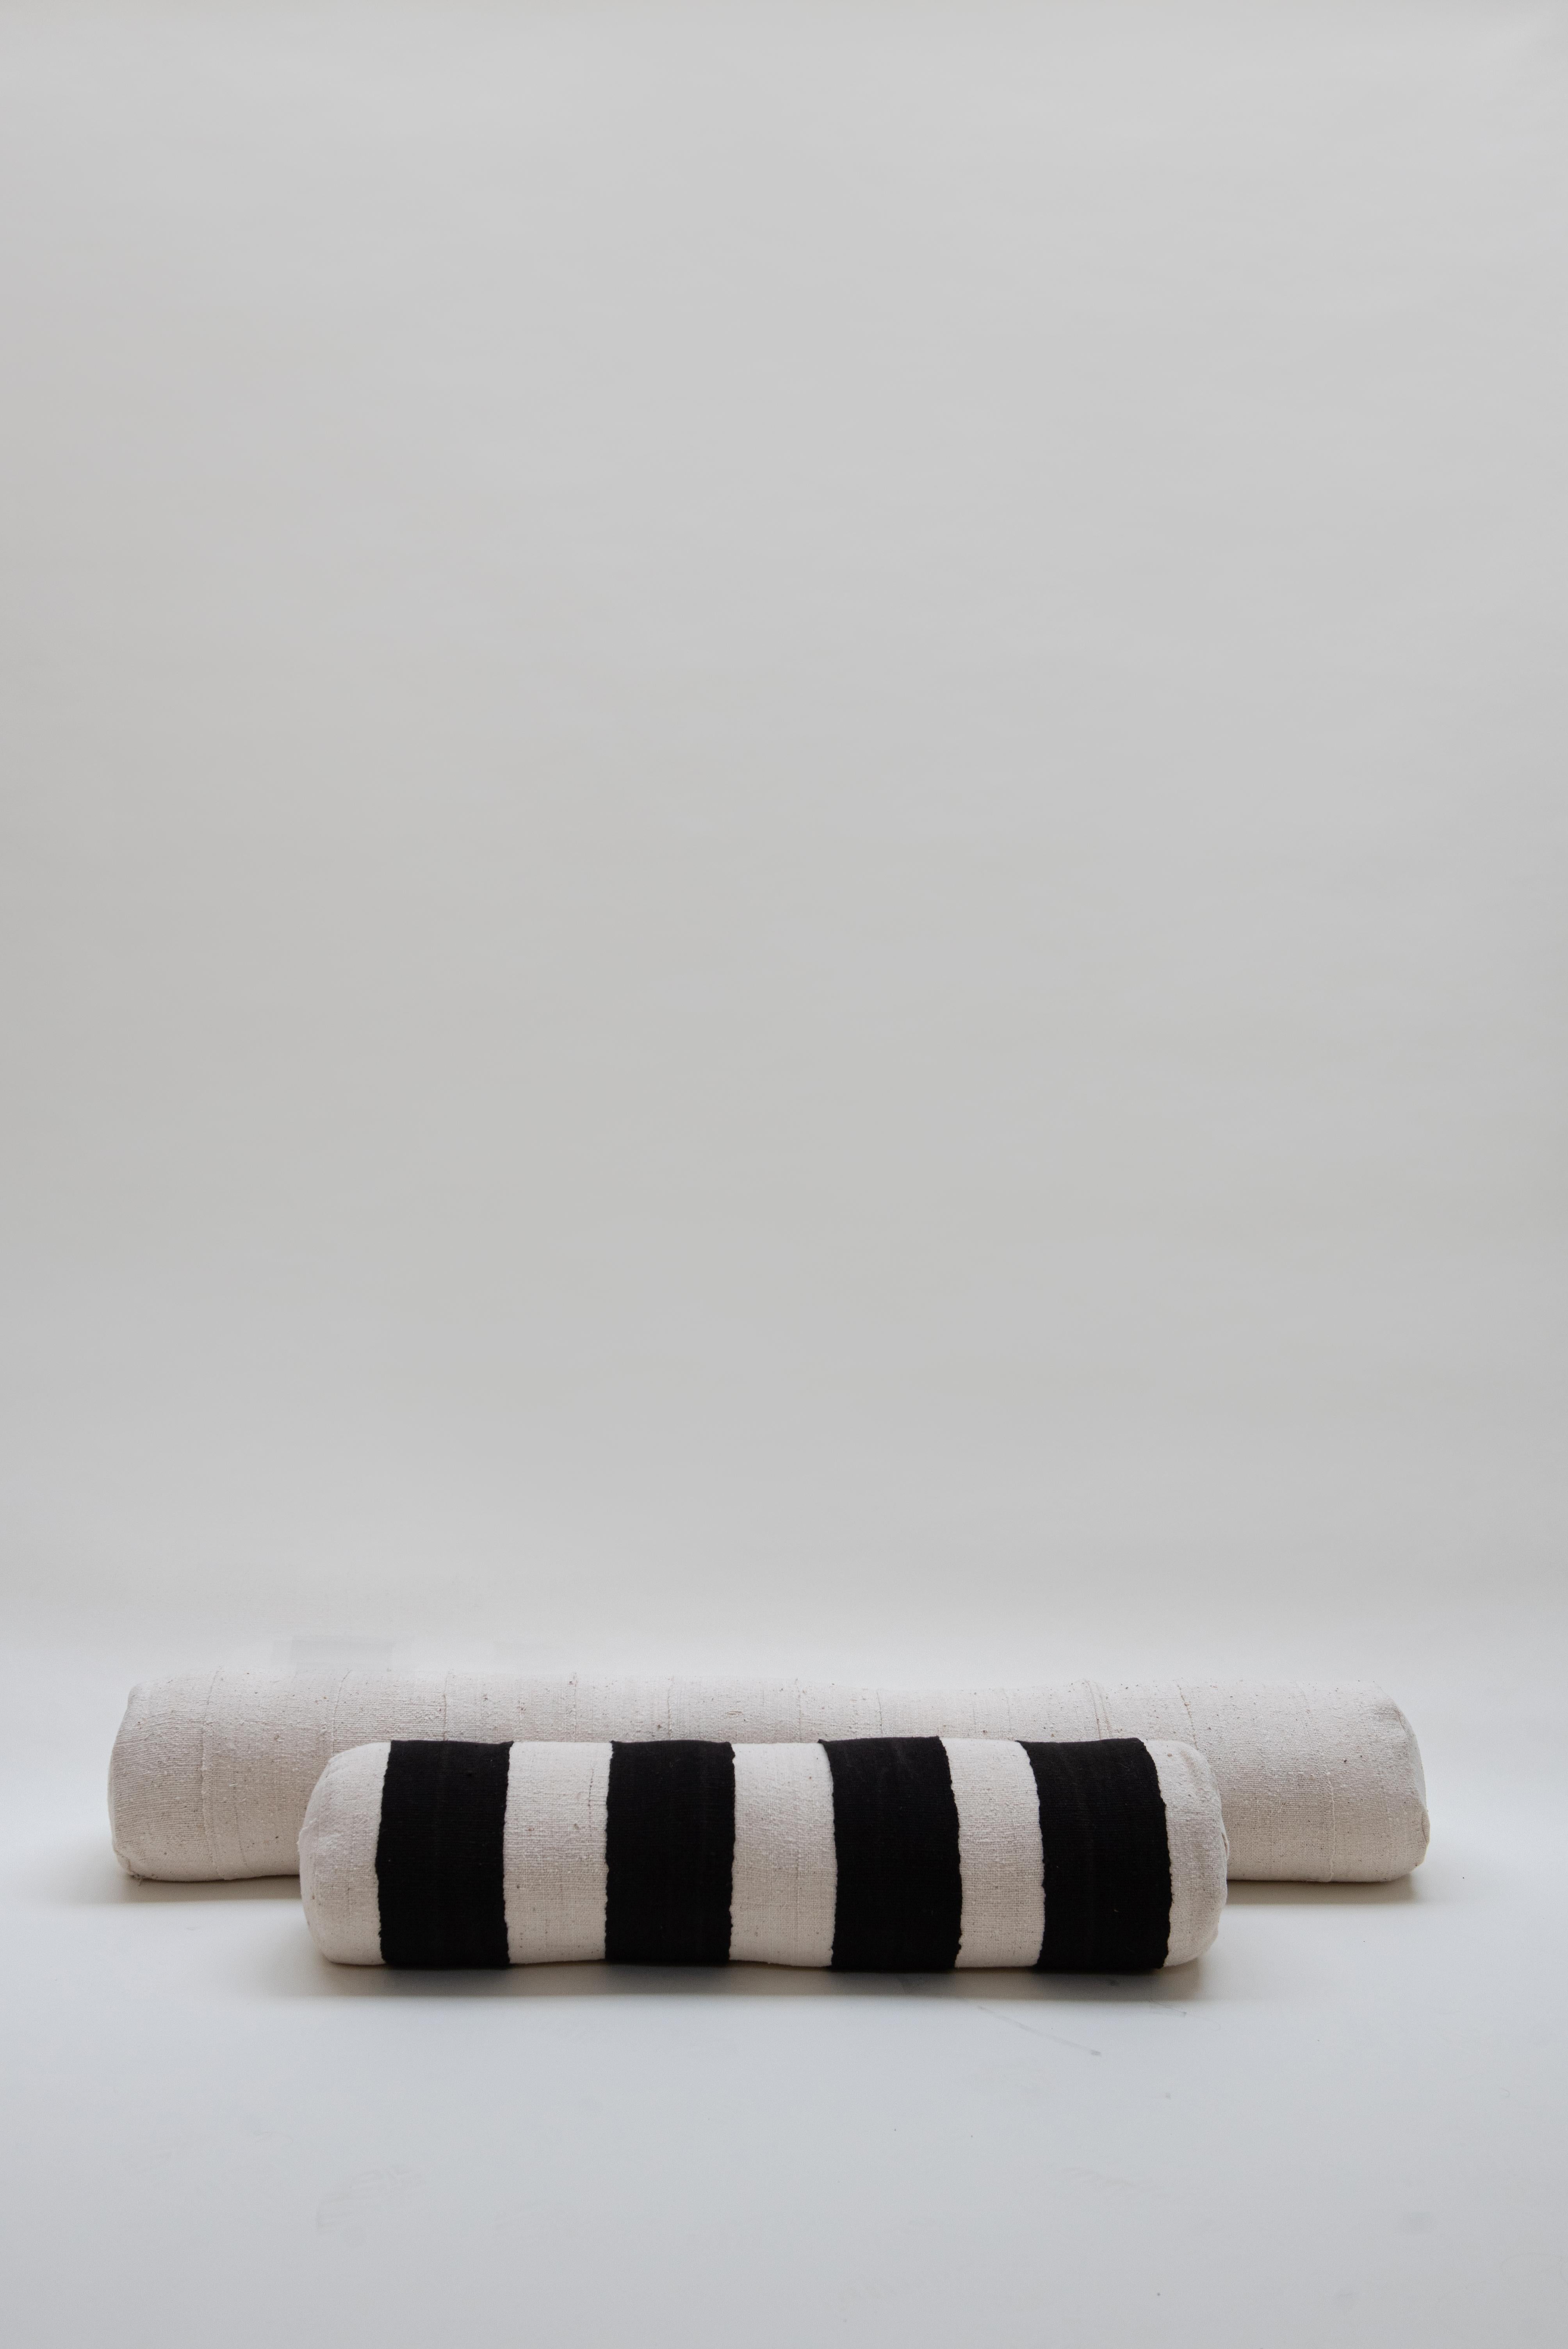 This white fabric is handwoven and plant-dyed in the Dogon region of Mali. The cotton is traditionally handpicked, spun and woven into small strips, which can still be seen in this cushion. The fabric softens over time. All final designs and